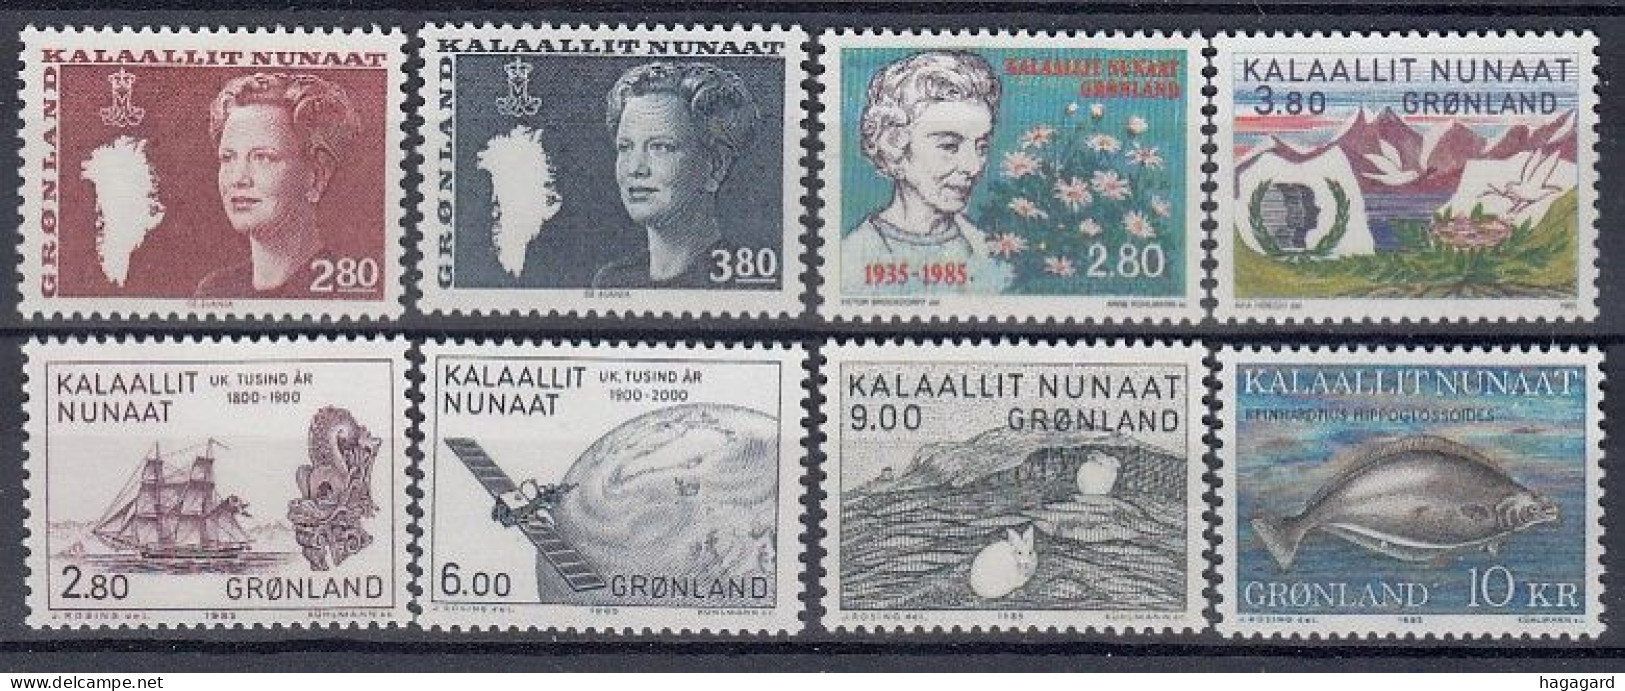 G2208. Greenland 1985. Complete Year Set. Michel 155-62. (15.10€). MNH(**) - Full Years